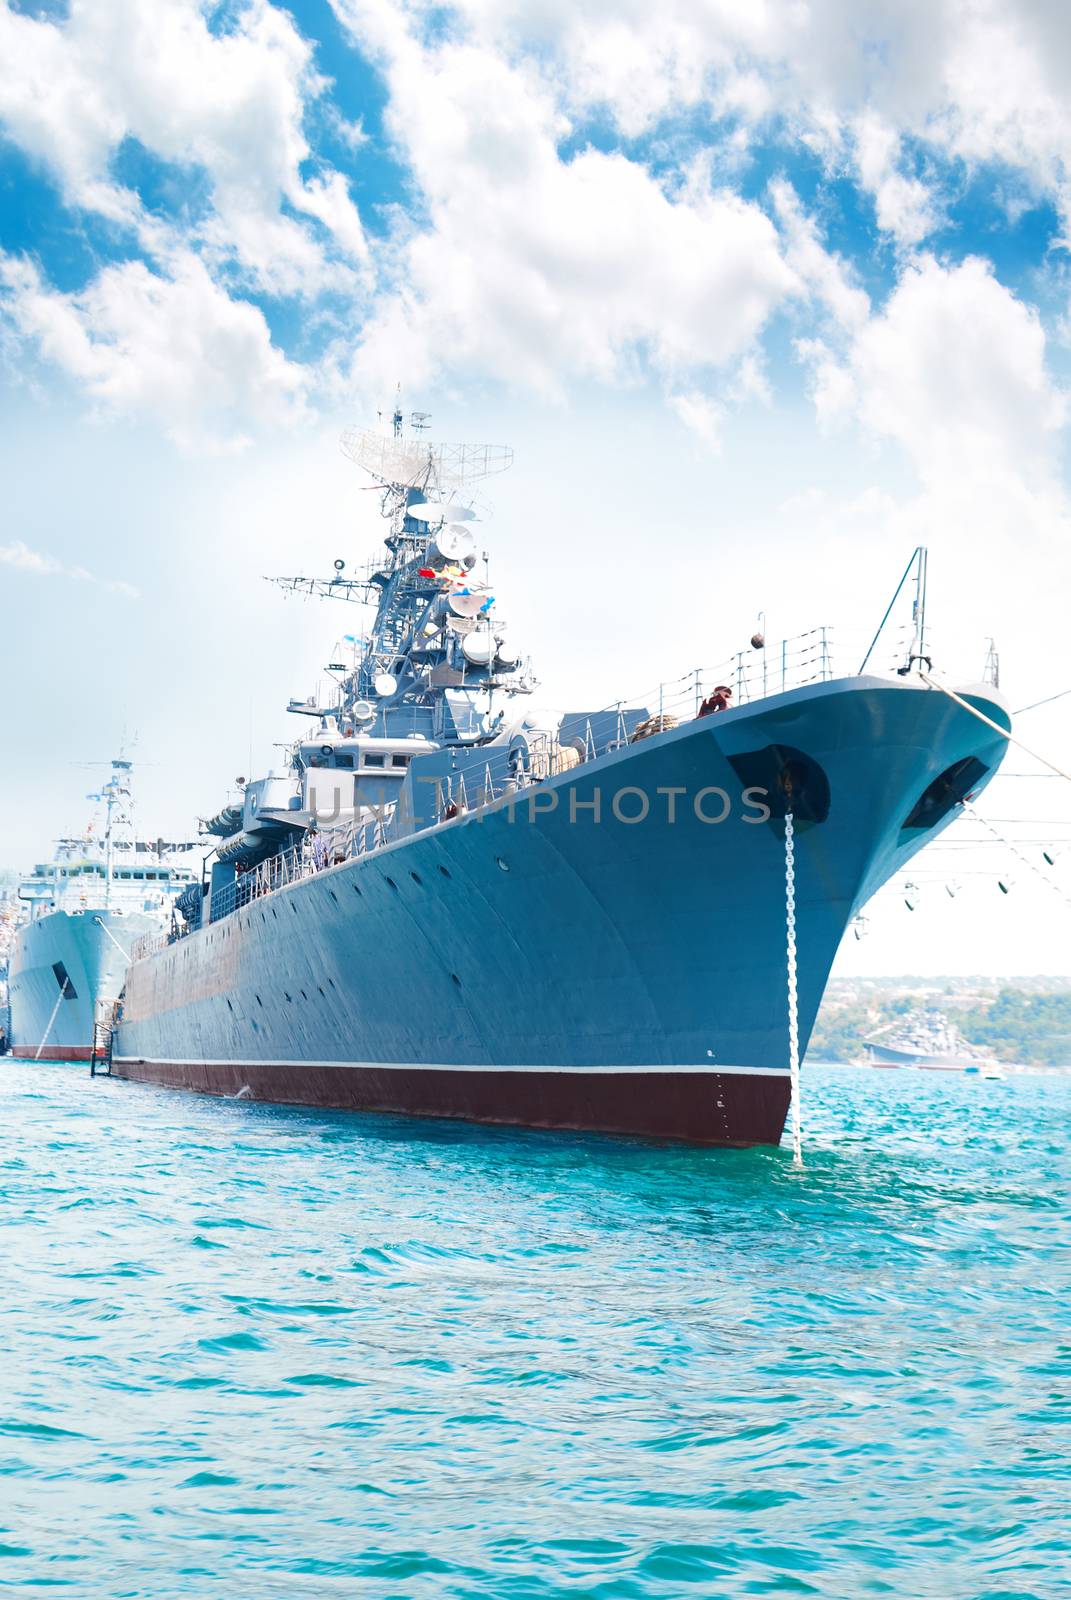 Military navy ship in the bay against blue sky